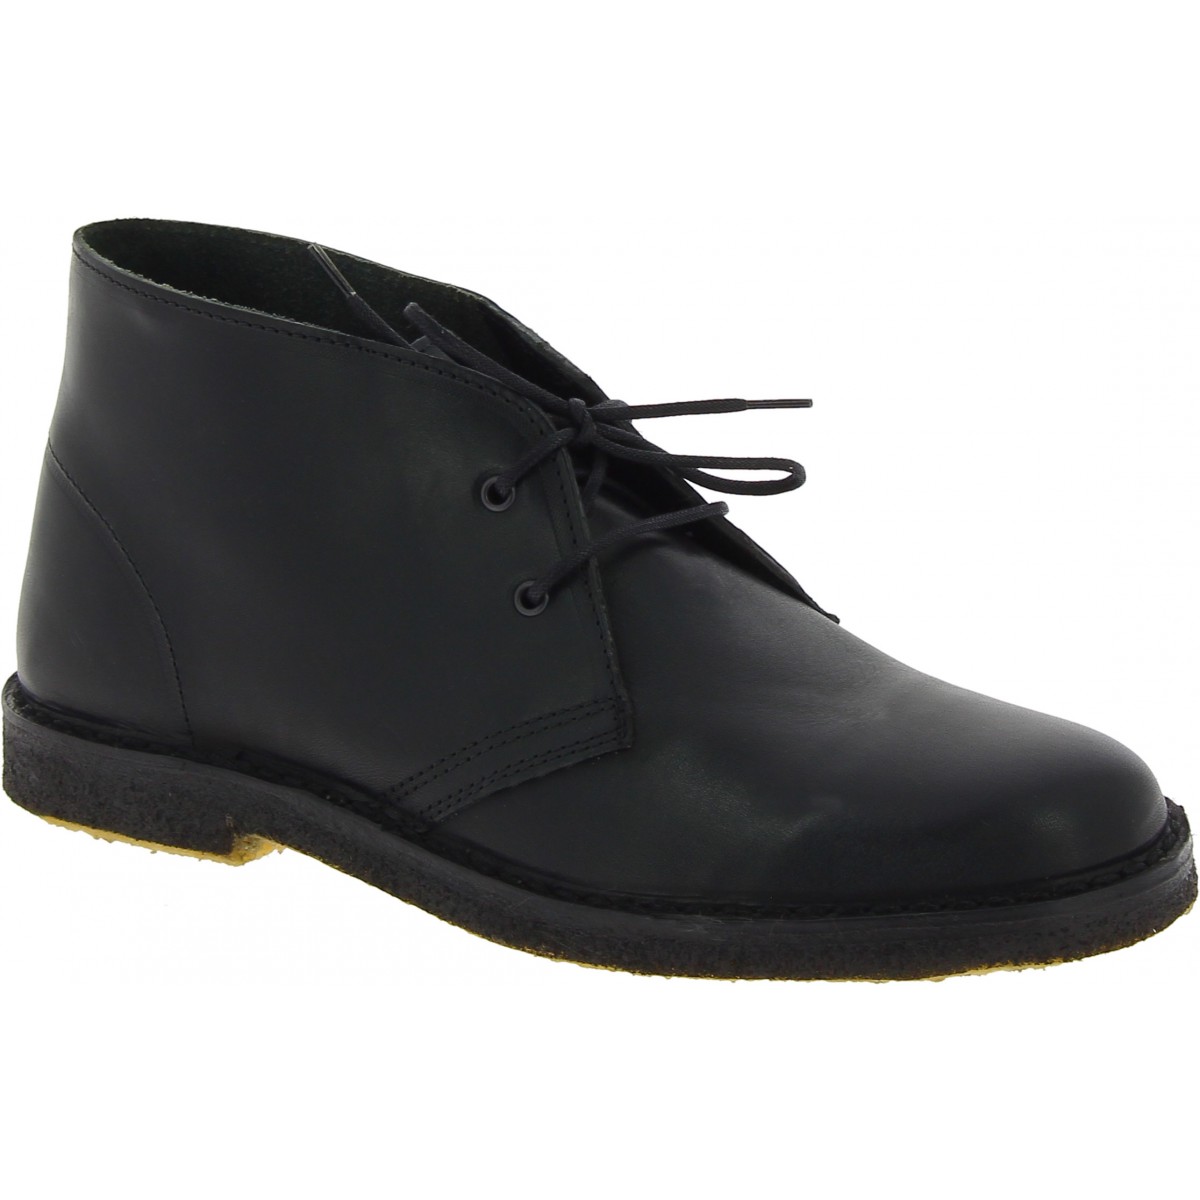 Women's black leather chukka boots handmade in Italy | The leather ...